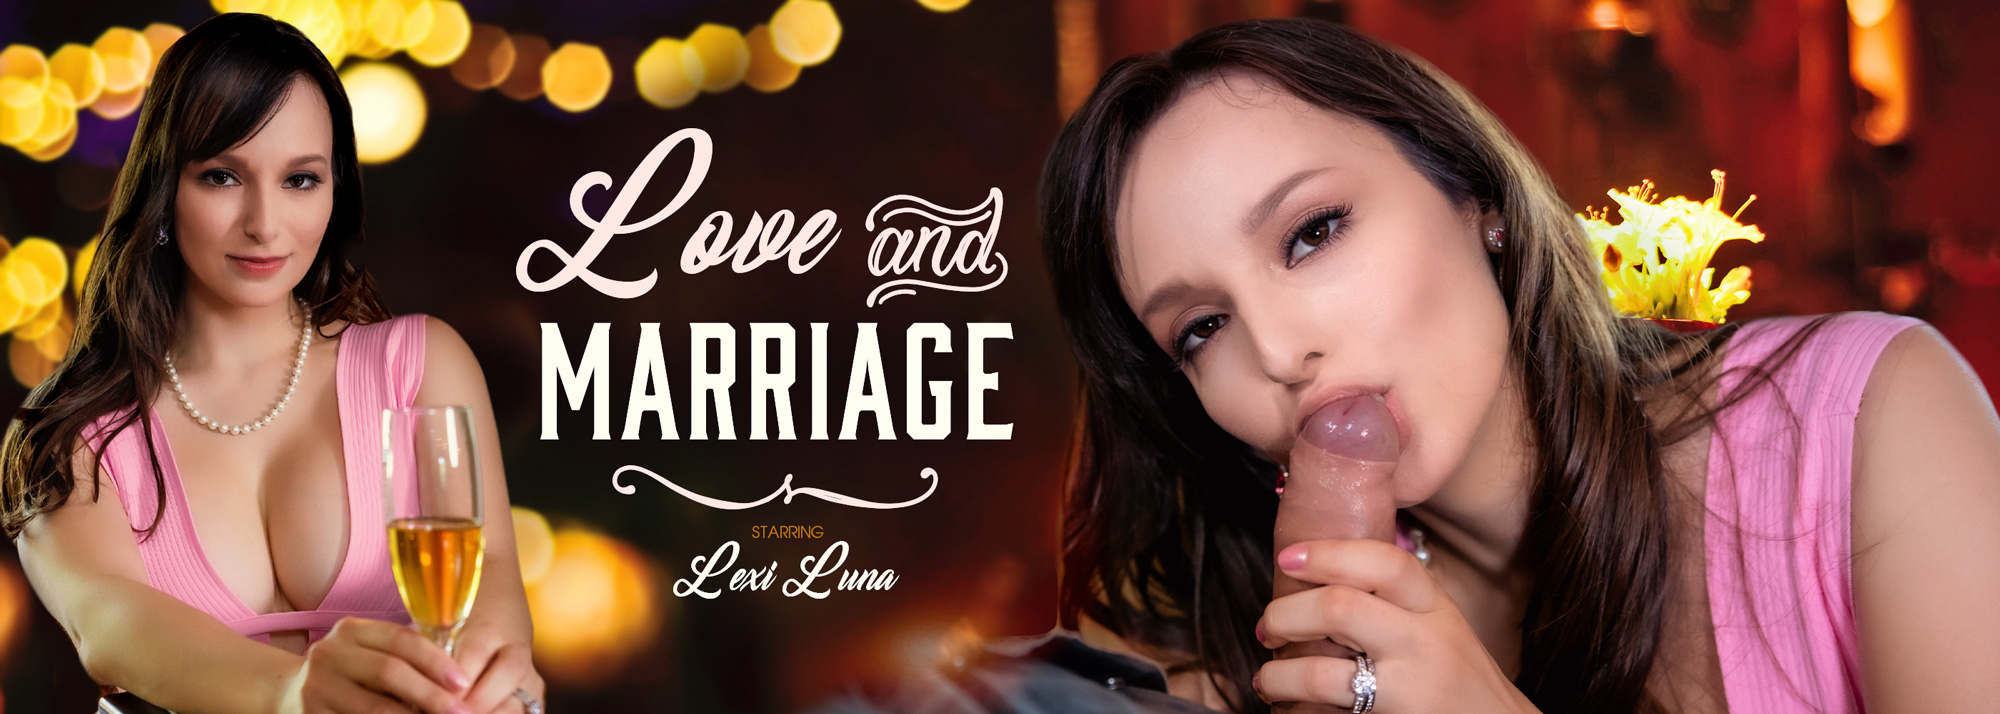 Love and Marriage - VR Porn Video, Starring: Lexi Luna